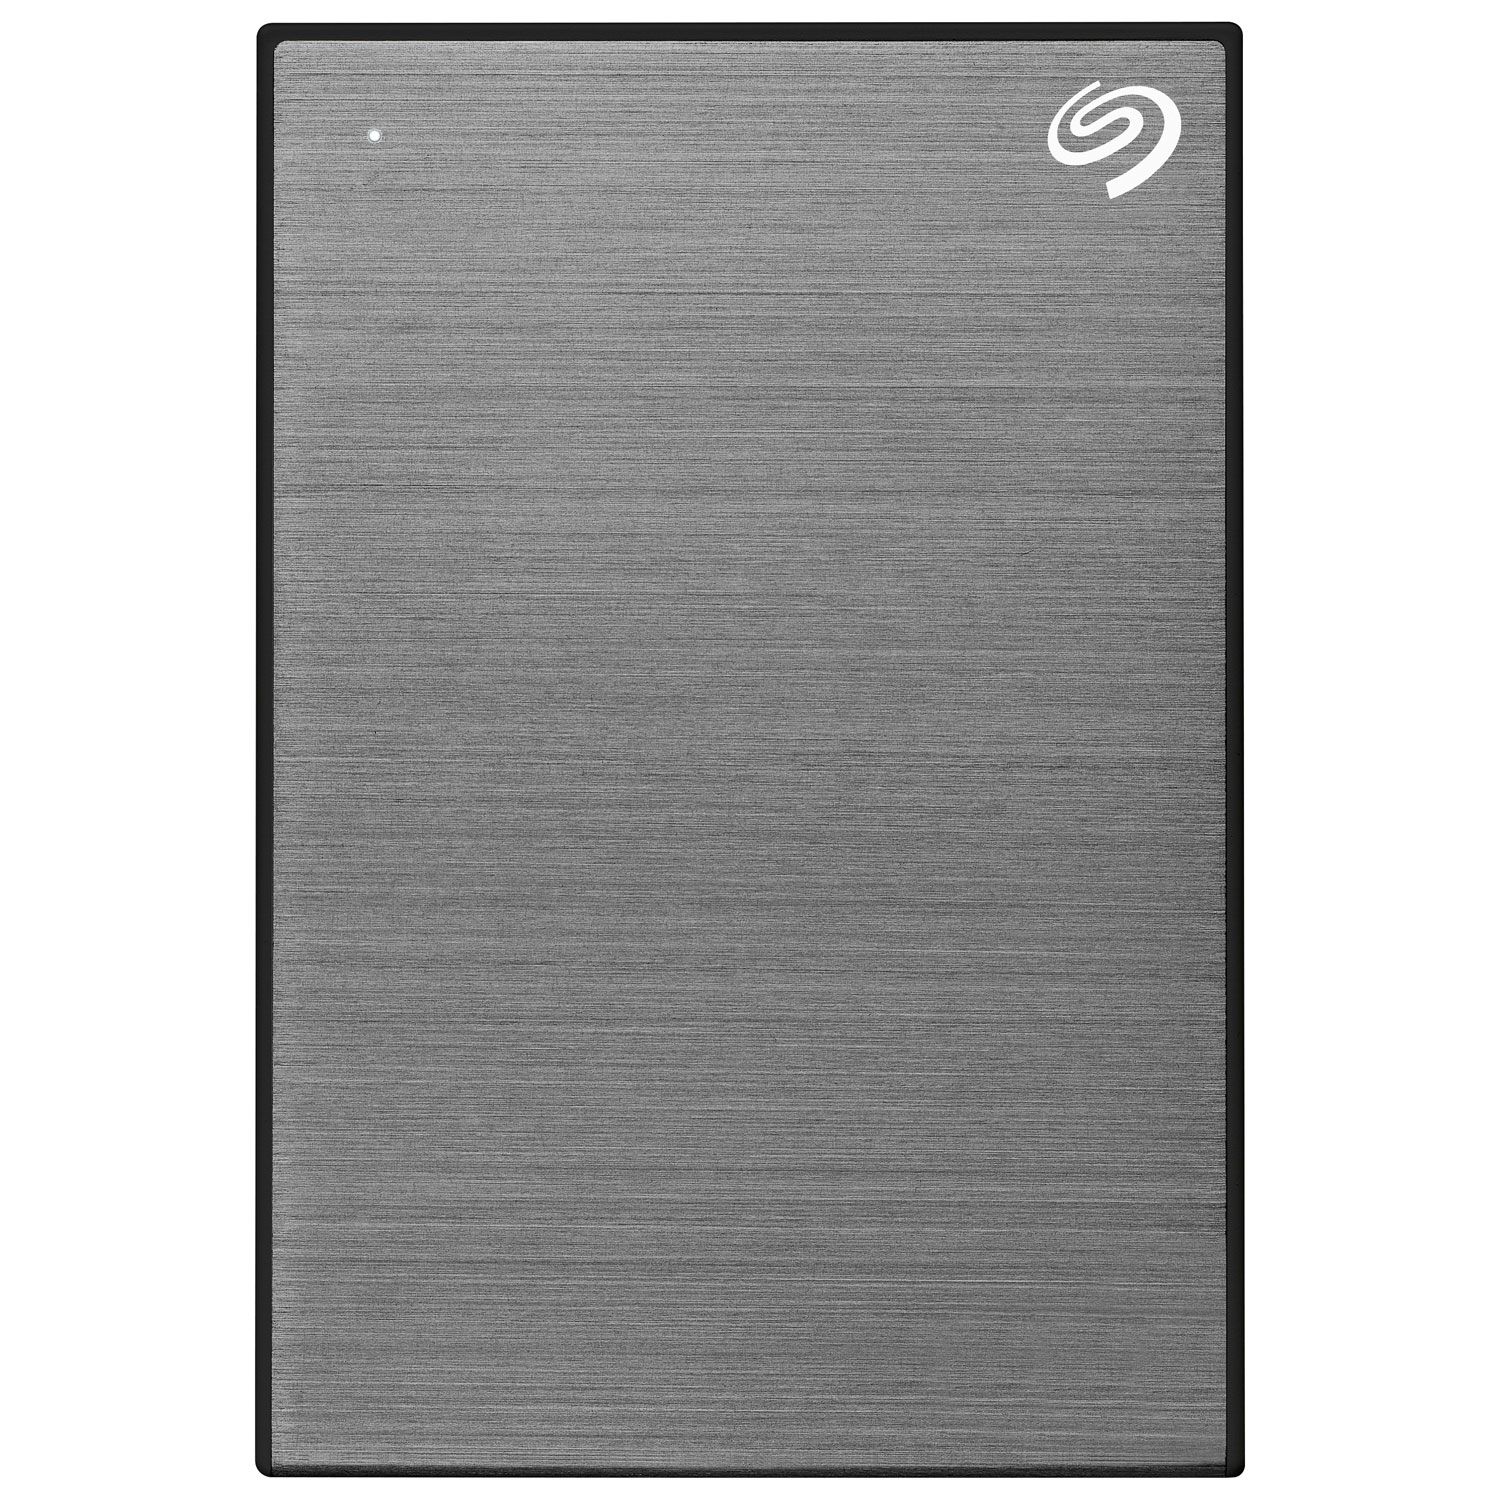 Seagate One Touch 4TB USB 3.0 Portable External Hard Drive (STKZ4000404) - Space Grey